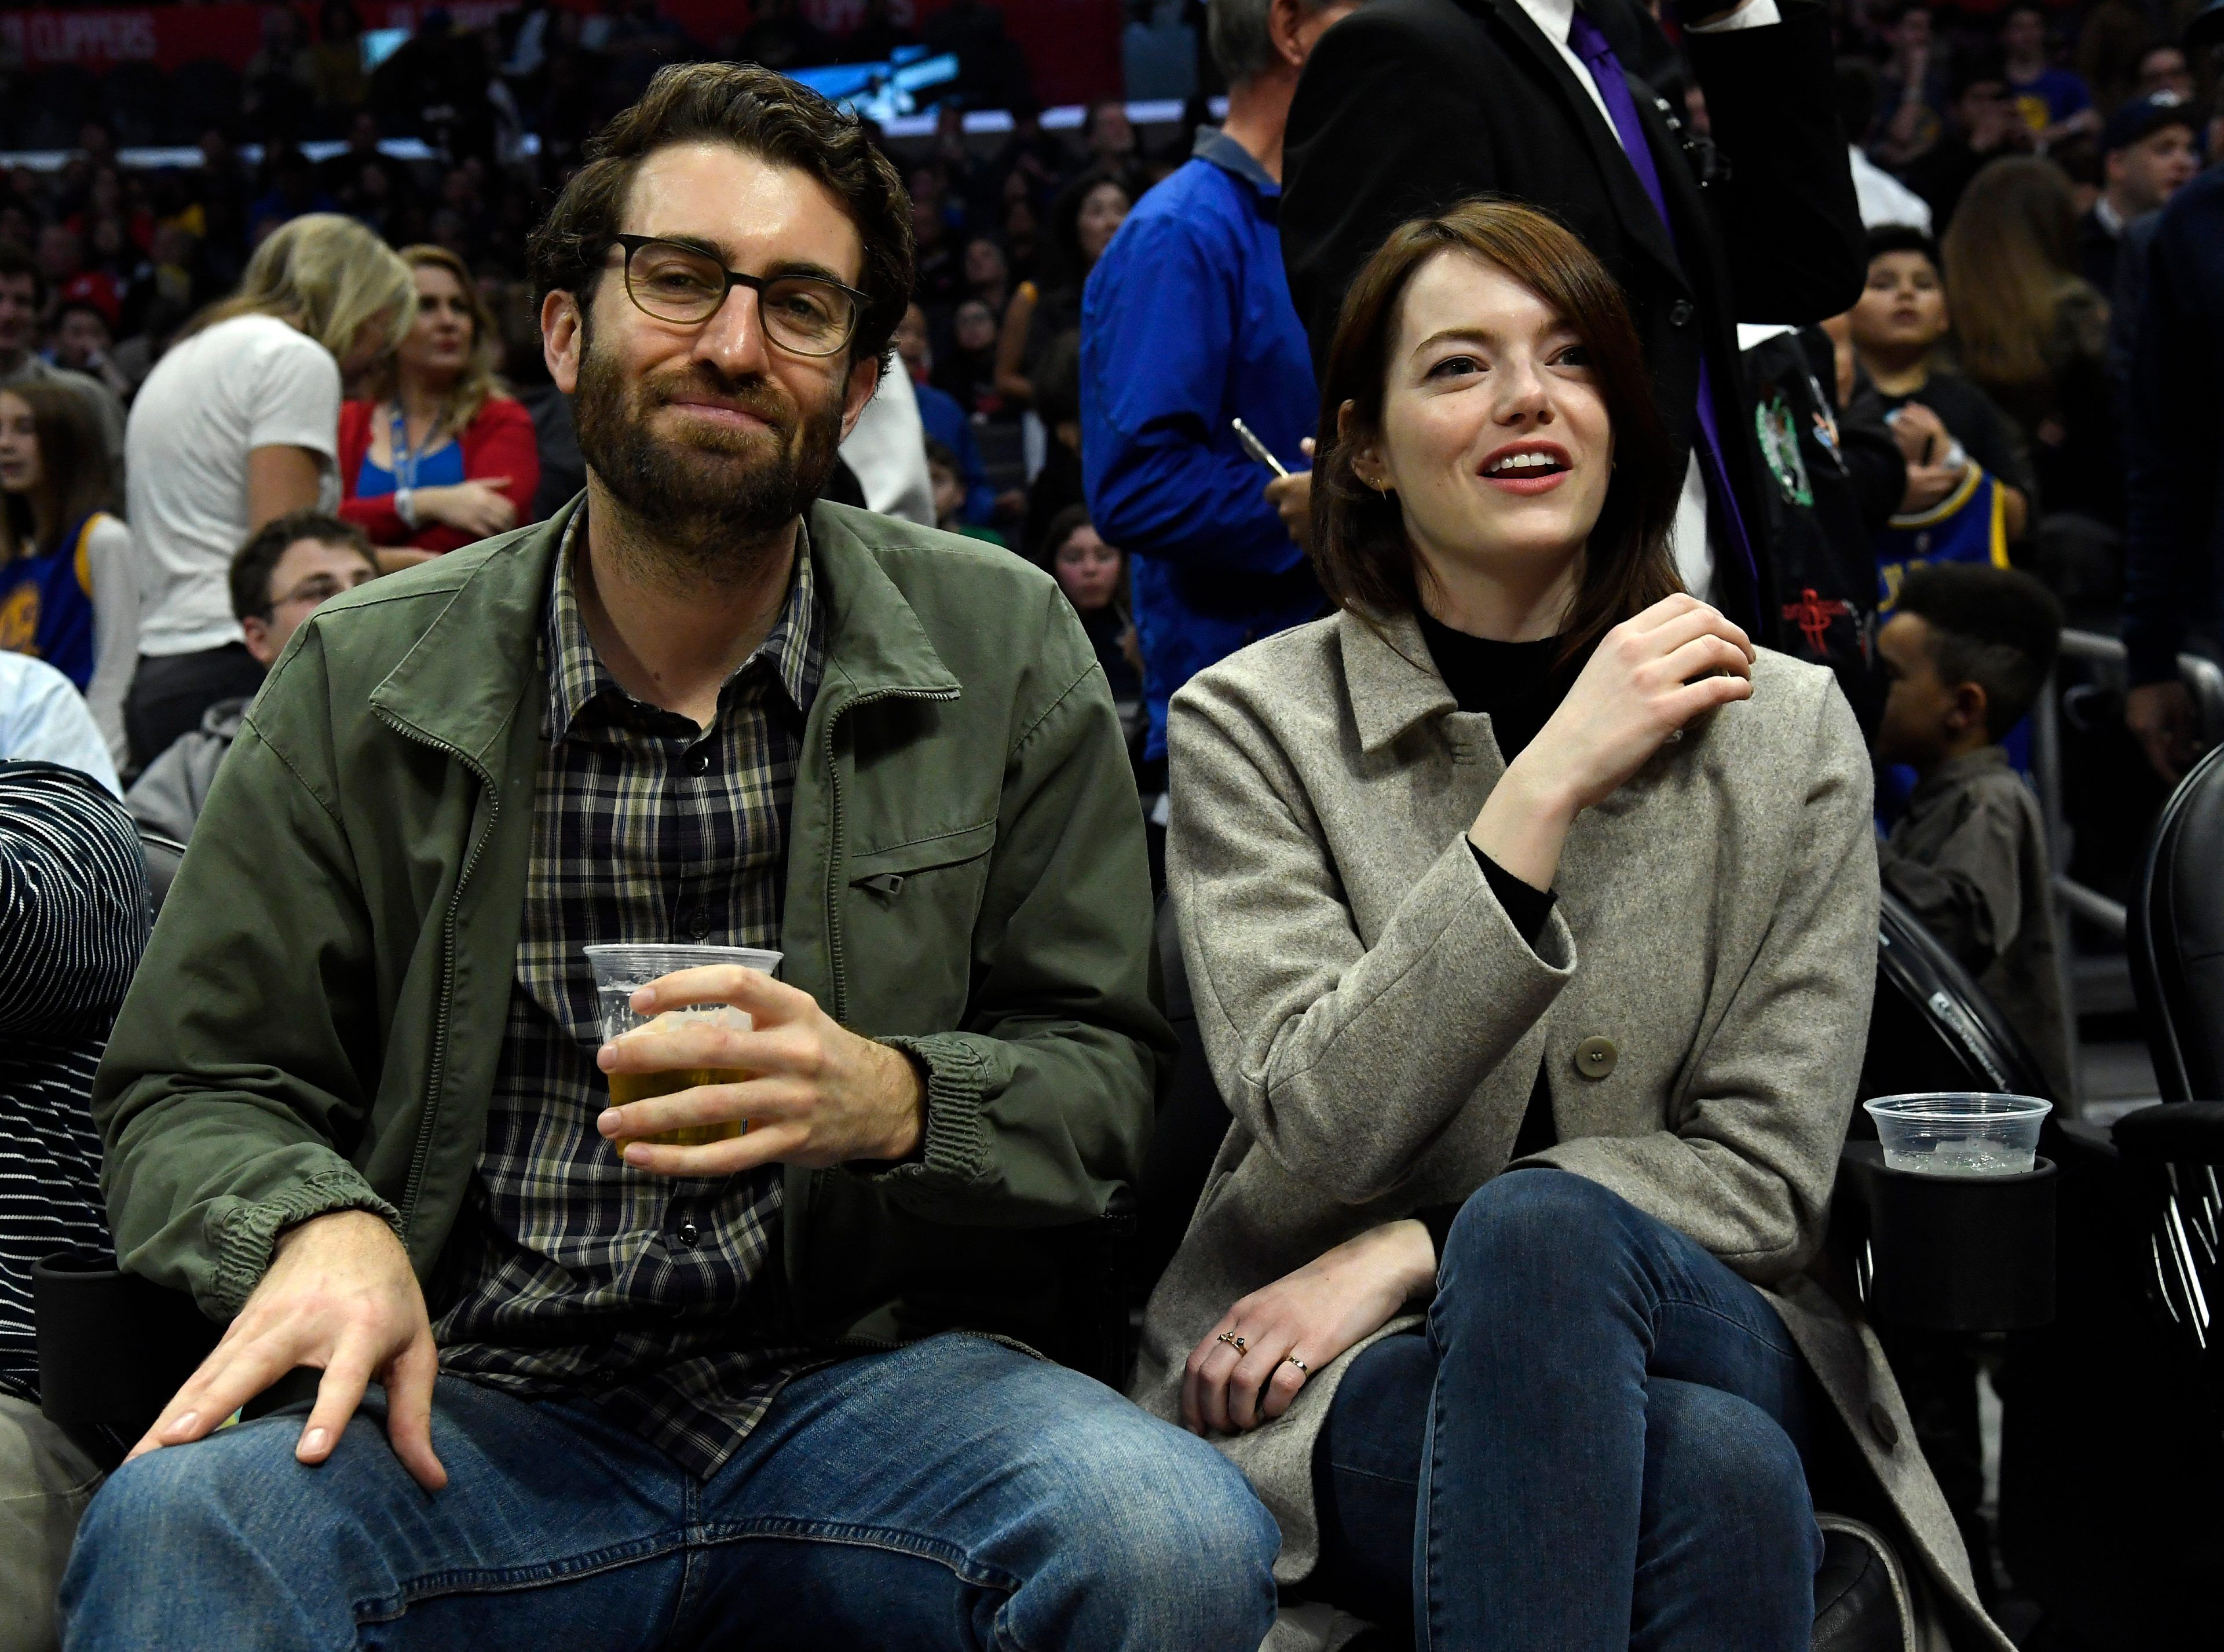 Emma Stone Expecting First Child With Dave McCary